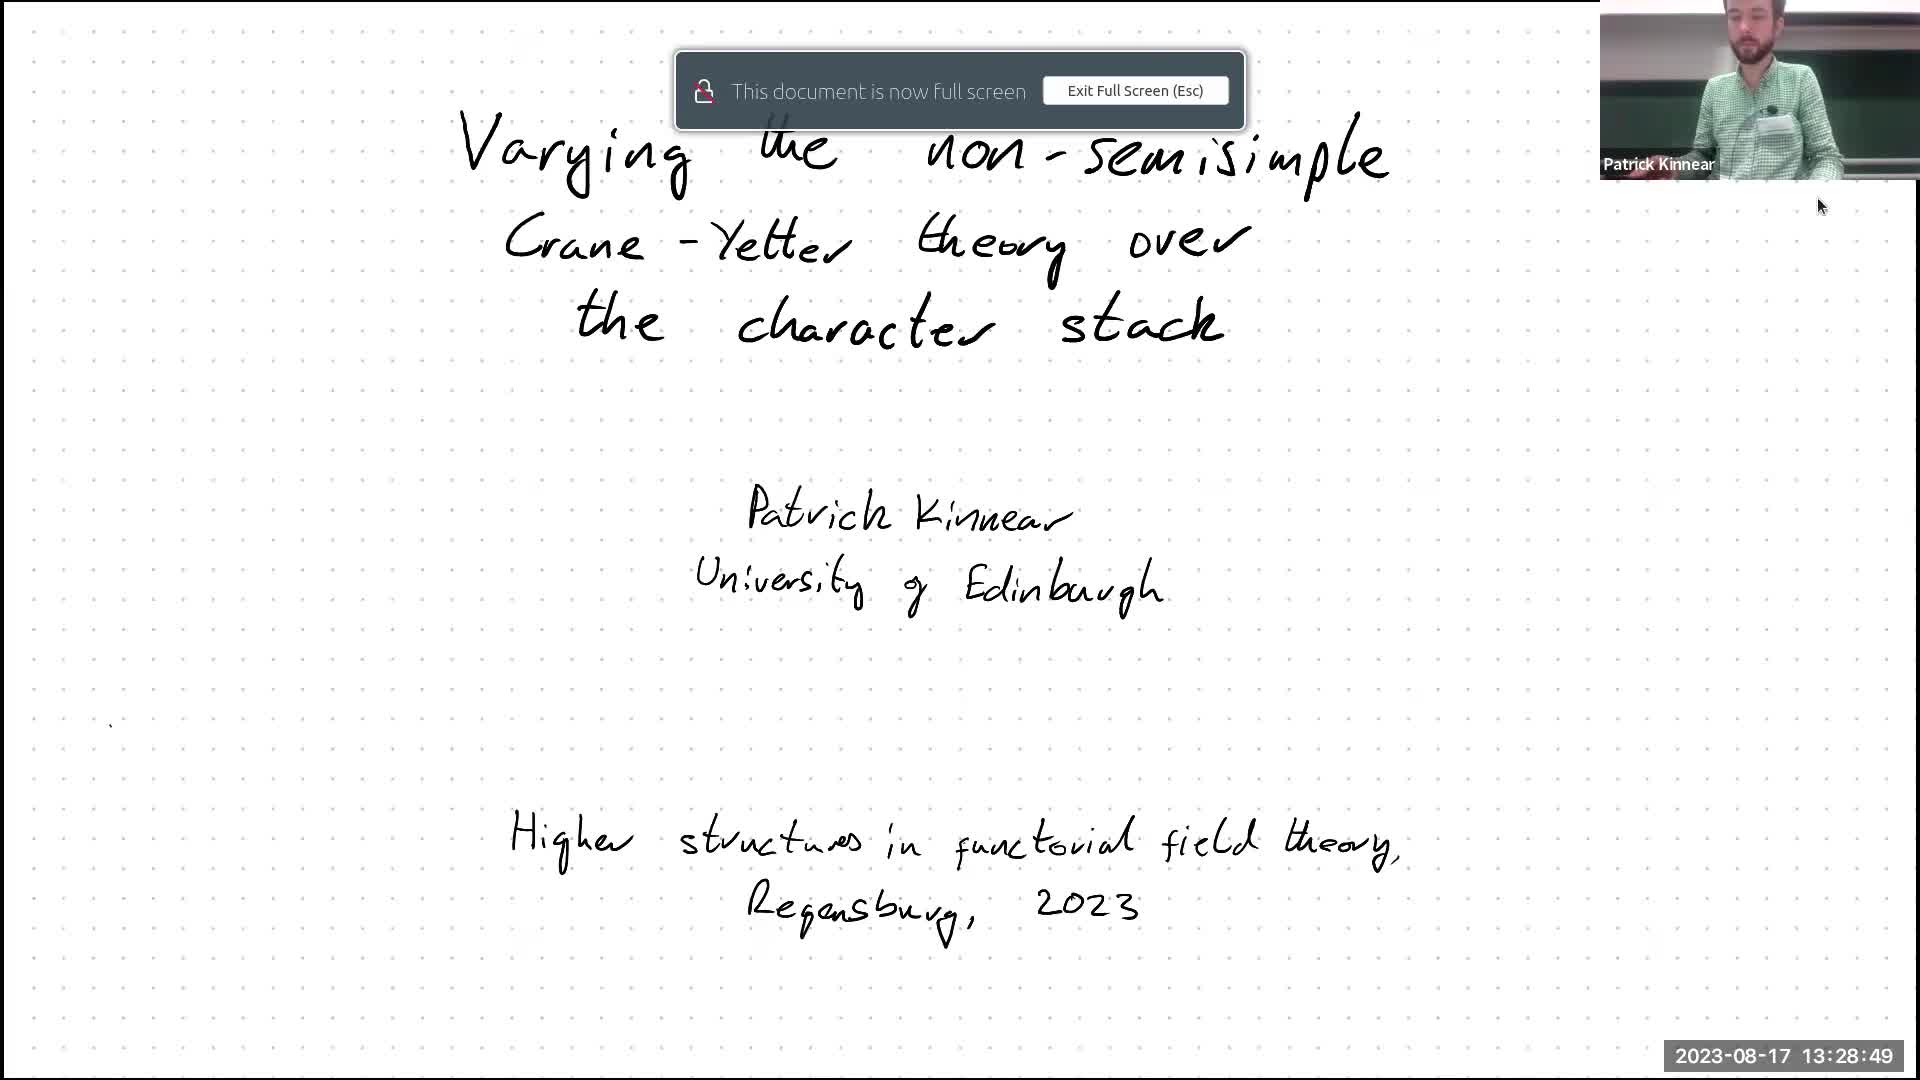 Patrick Kinnear: Varying the non-semisimple Crane-Yetter theory over the character stack